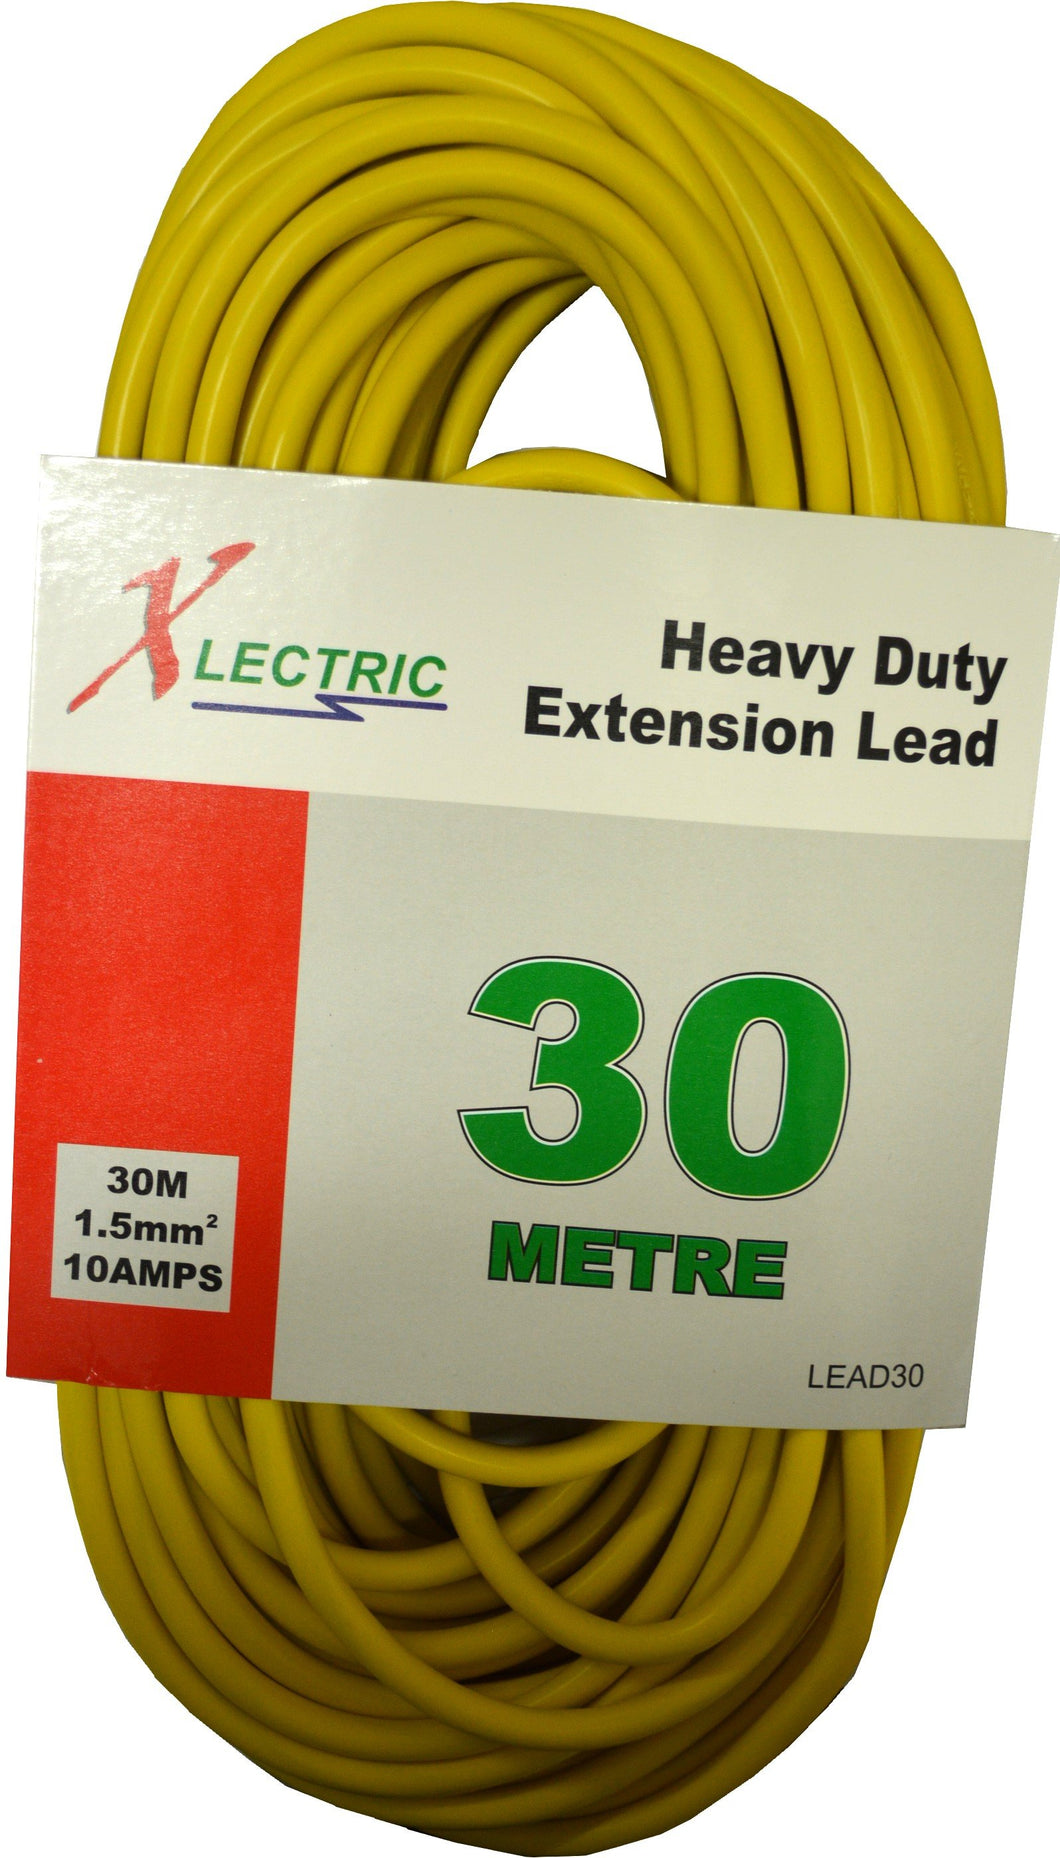 Extension Lead - Heavy Duty Yellow 30m Xlectric